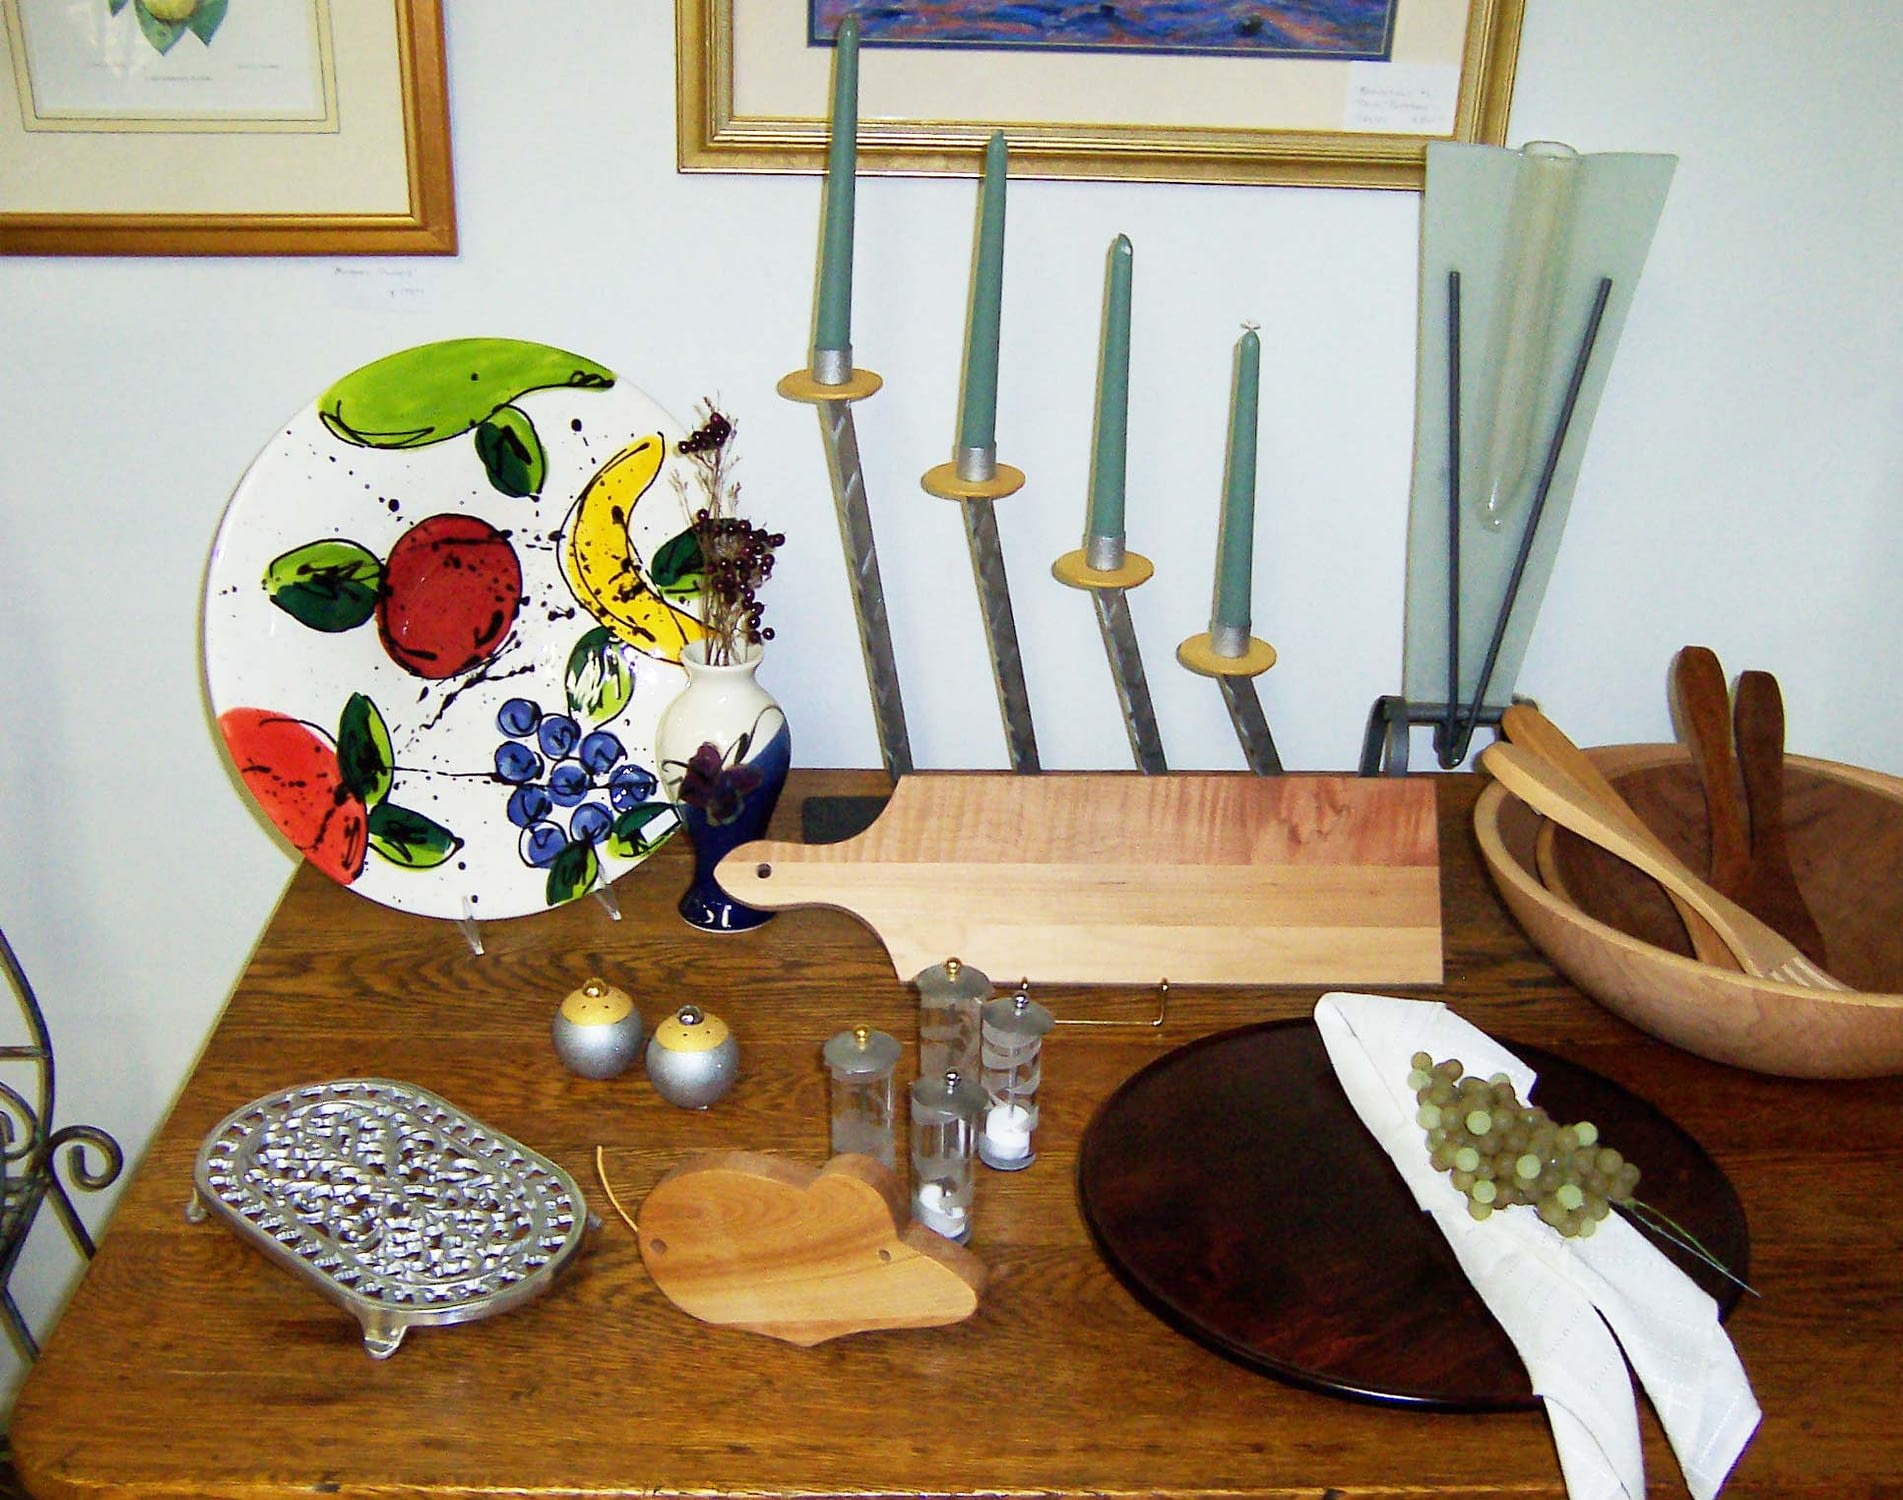 Wood table with ceramic art and wooden serving platters and utensils on top